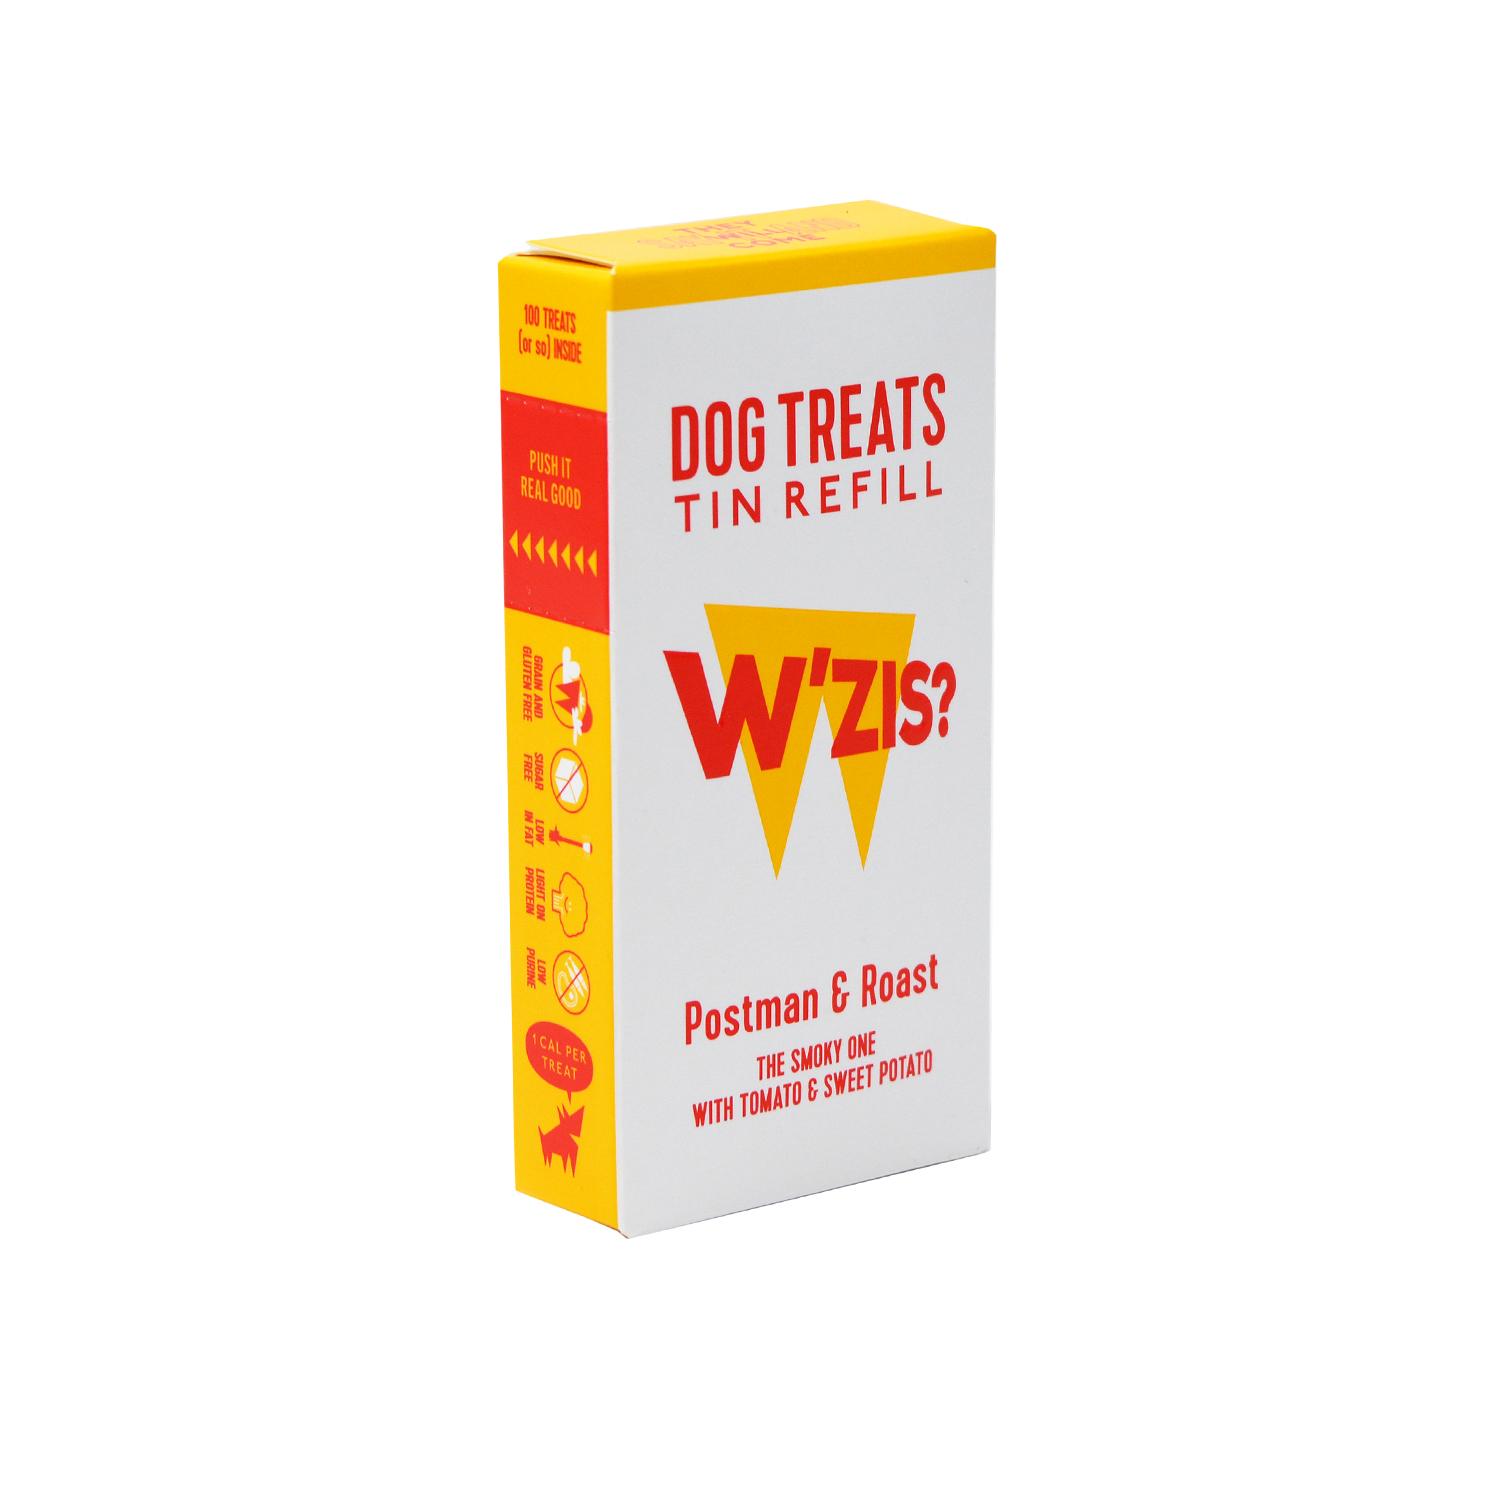 An angled view of a refill pack of W'ZIS plant based dog chews